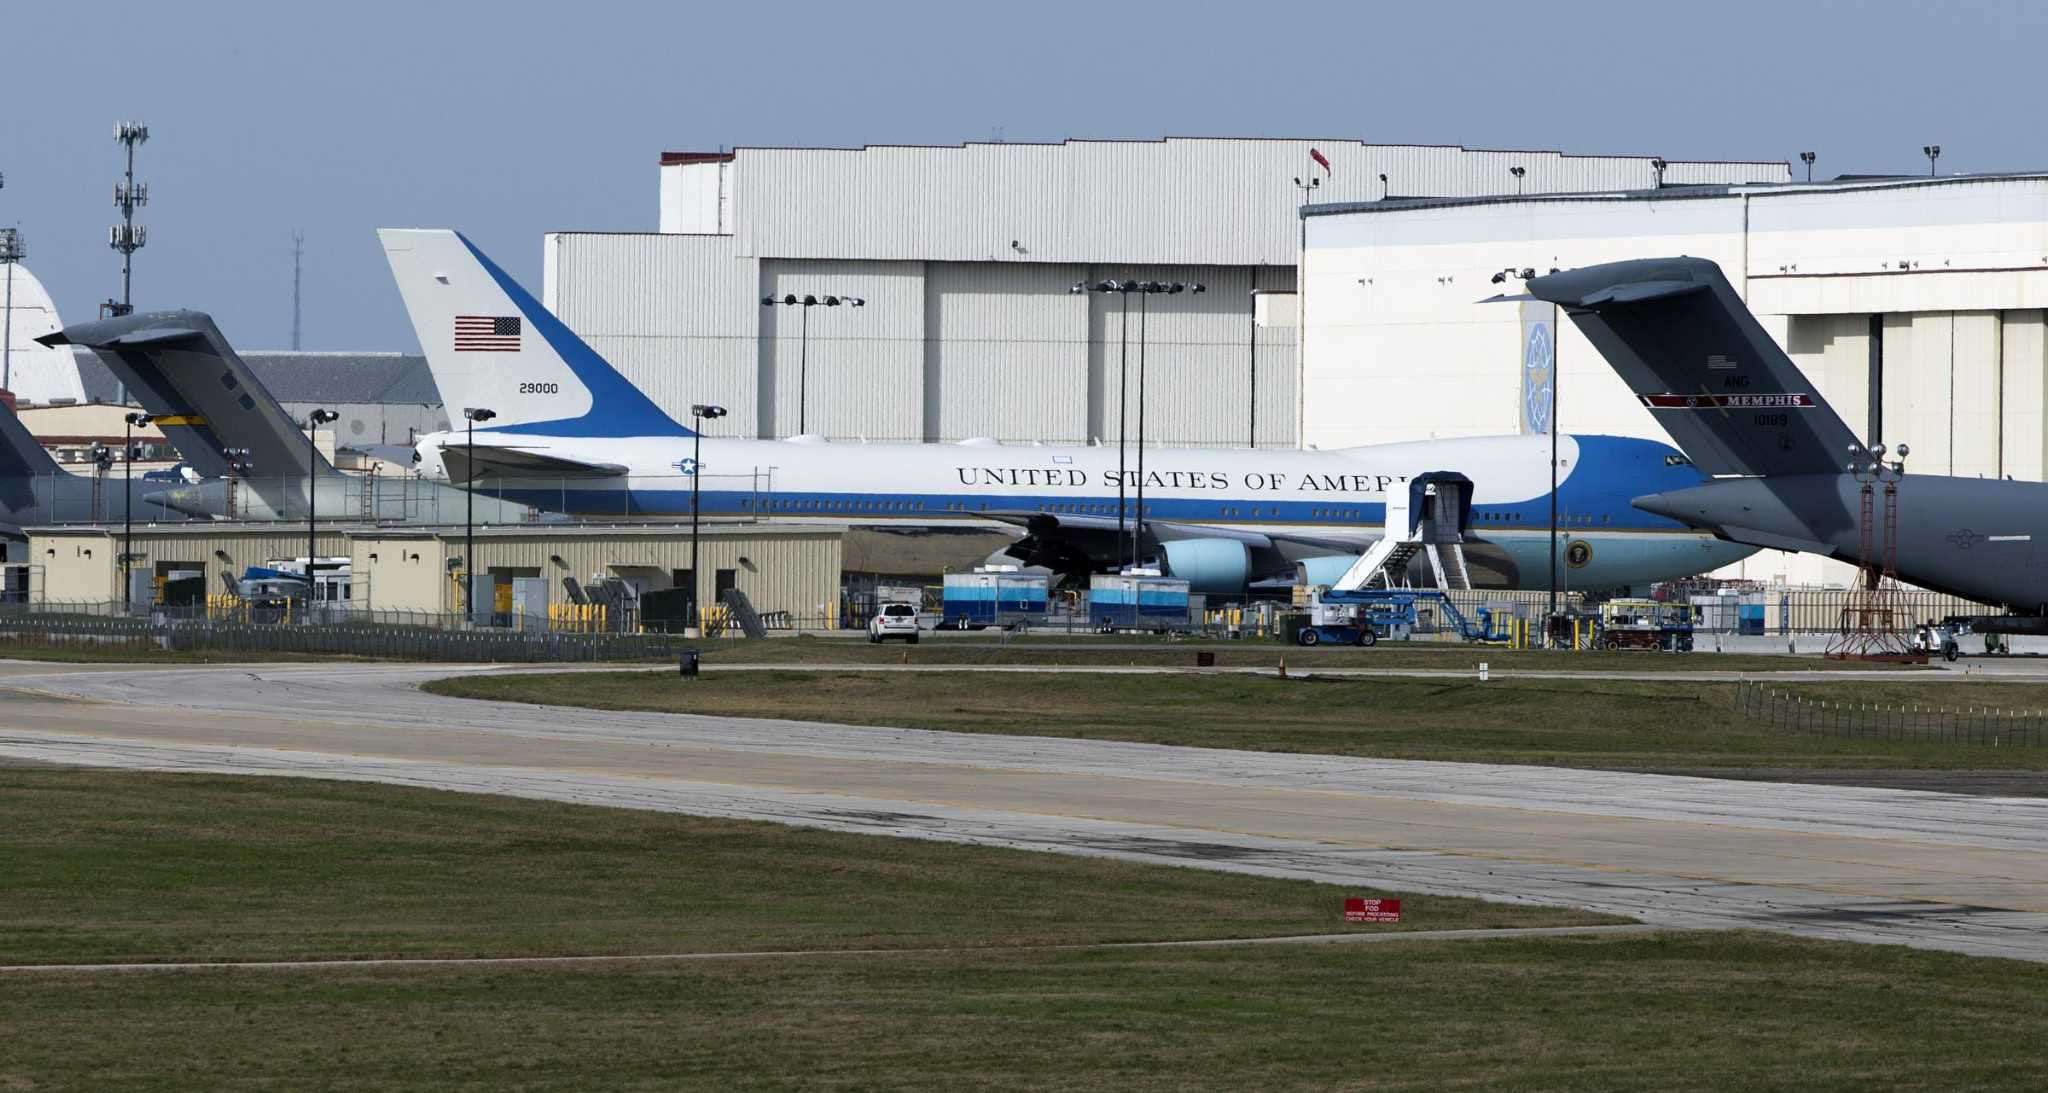 image for Boeing outsourced Air Force One work to insolvent Port San Antonio company tied to Saudis: whistleblower